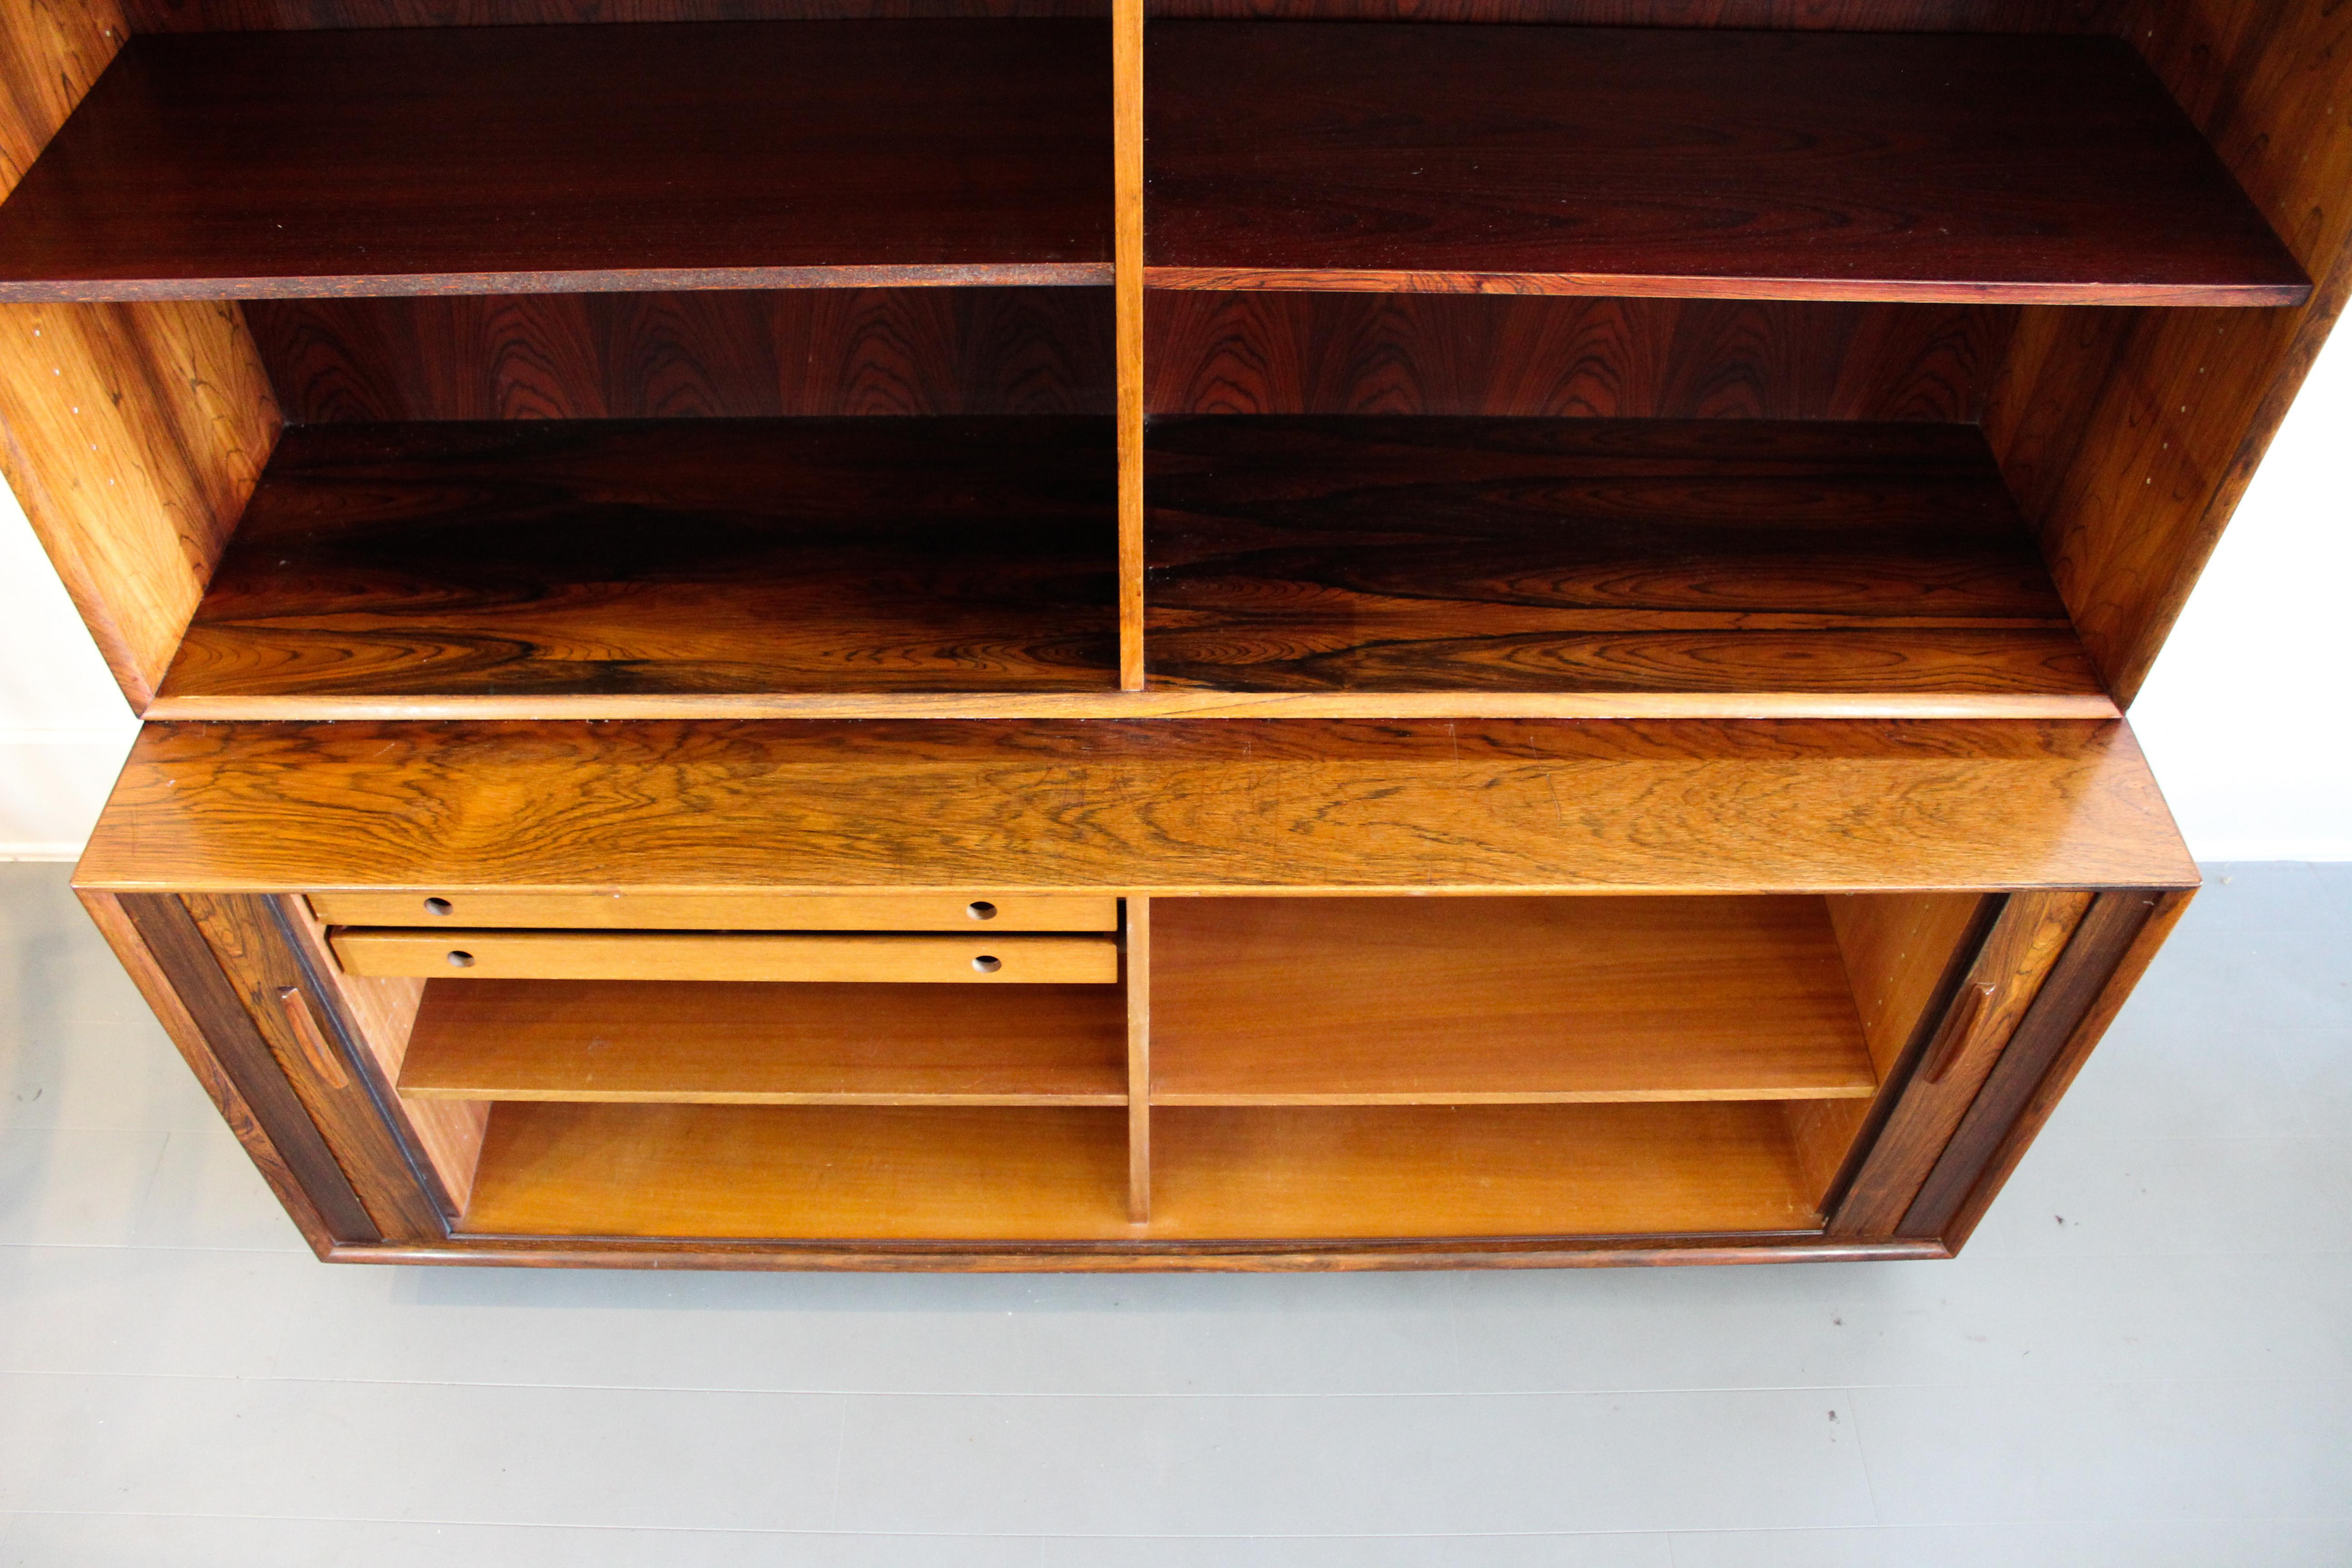 Midcentury Rosewood Arne Vodder Book Case with Tambour Doors by Sibast, 1950s For Sale 14